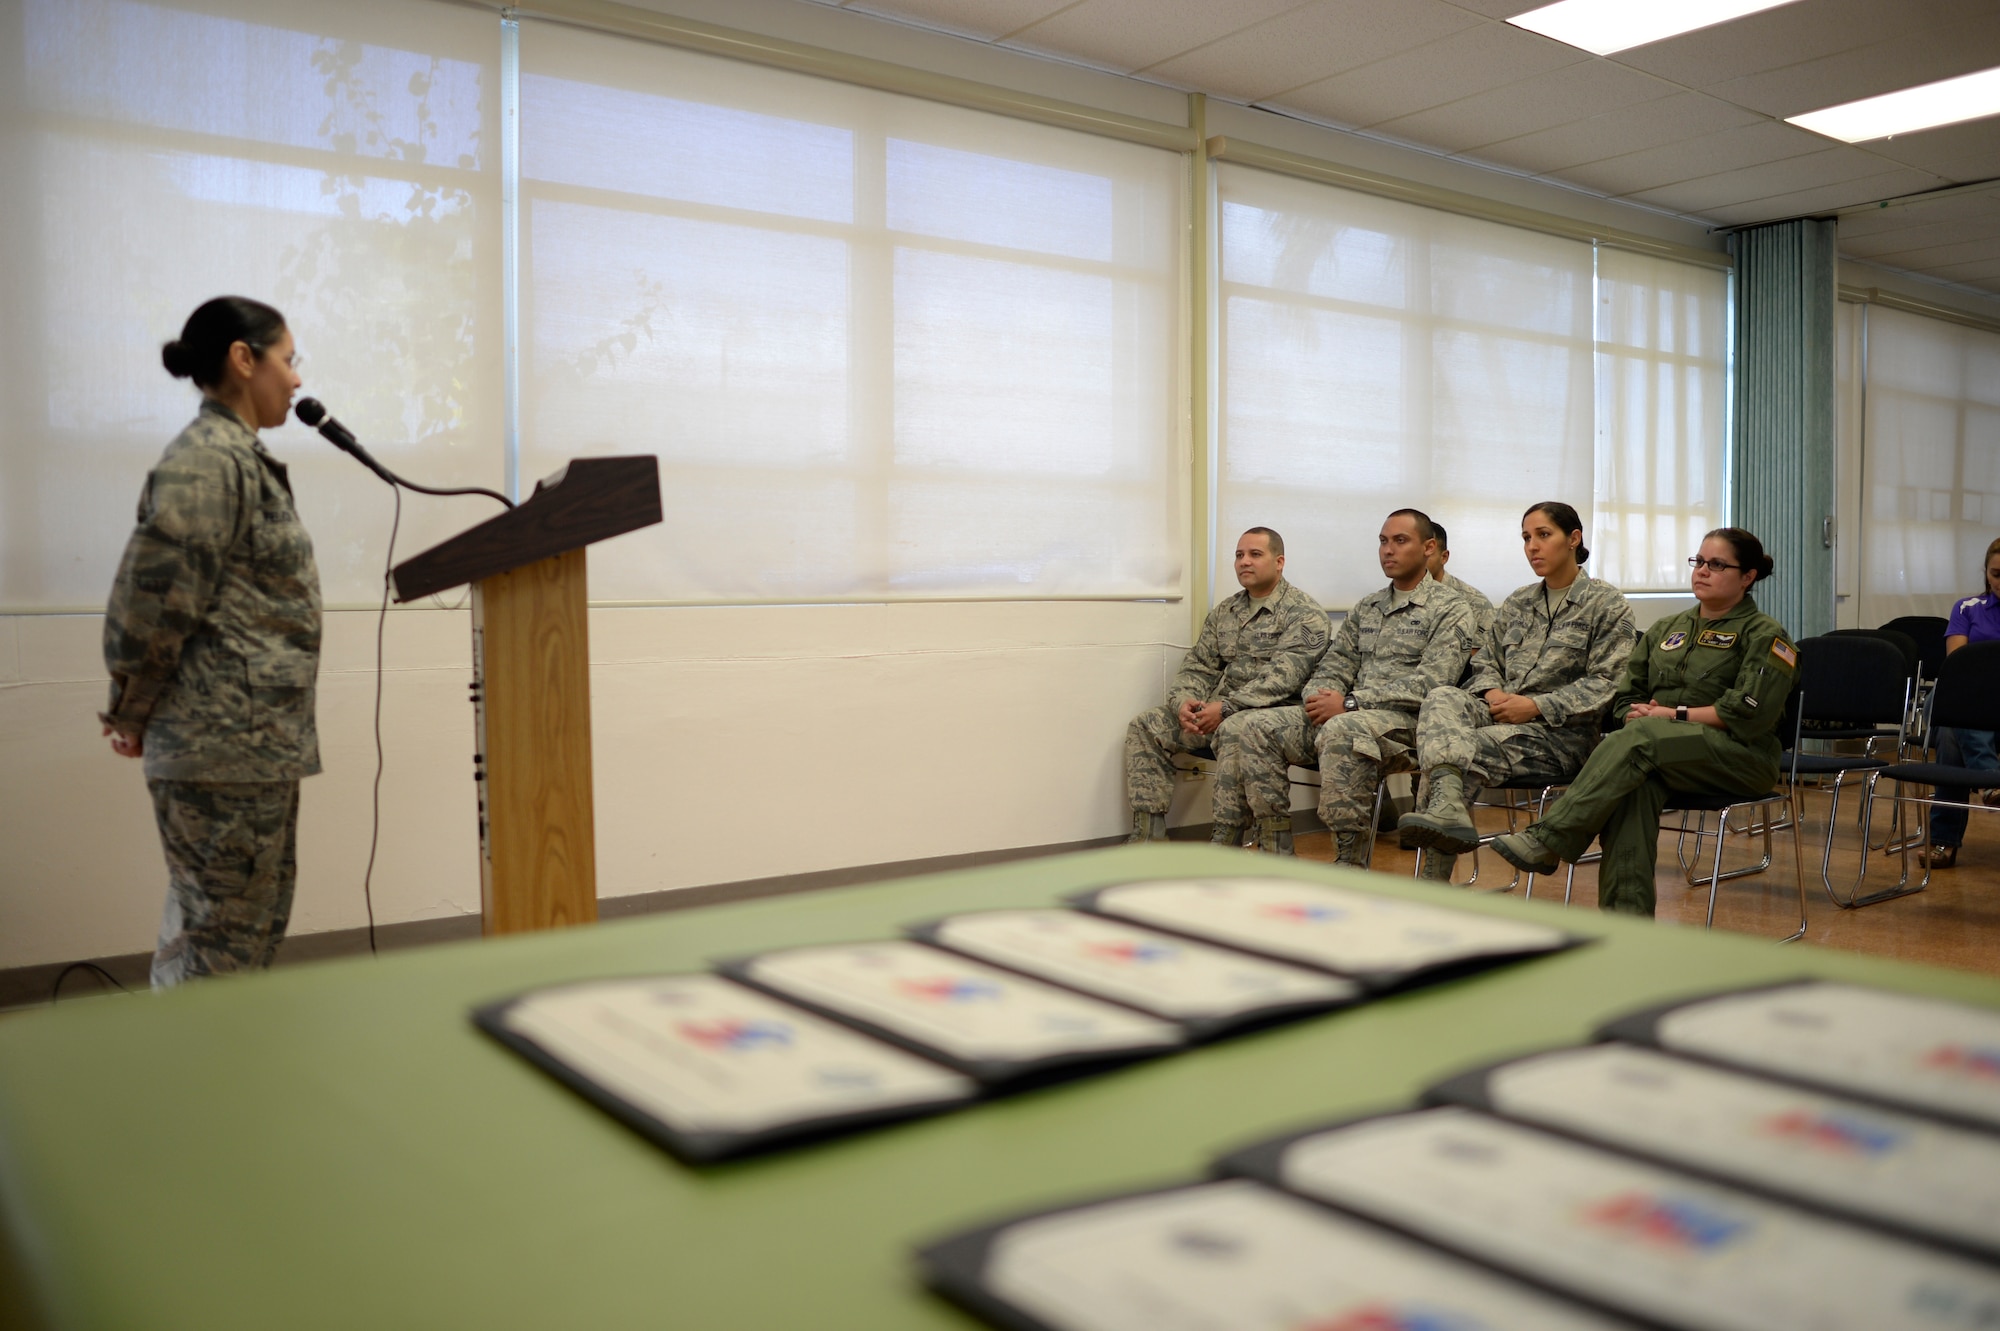 U.S. Air Force airmen of the 156th Airlift Wing receive recognition from Capt. Angela Feliciano, 156th AW SAPR Program coordinator, for their volunteer efforts and support of the Sexual Assault Prevention and Response Program during an appreciation breakfast held at Muñiz Air National Guard Base, Carolina, Puerto Rico, April 14. (U.S. Air National Guard photo by Staff Sgt. Christian Jadot)